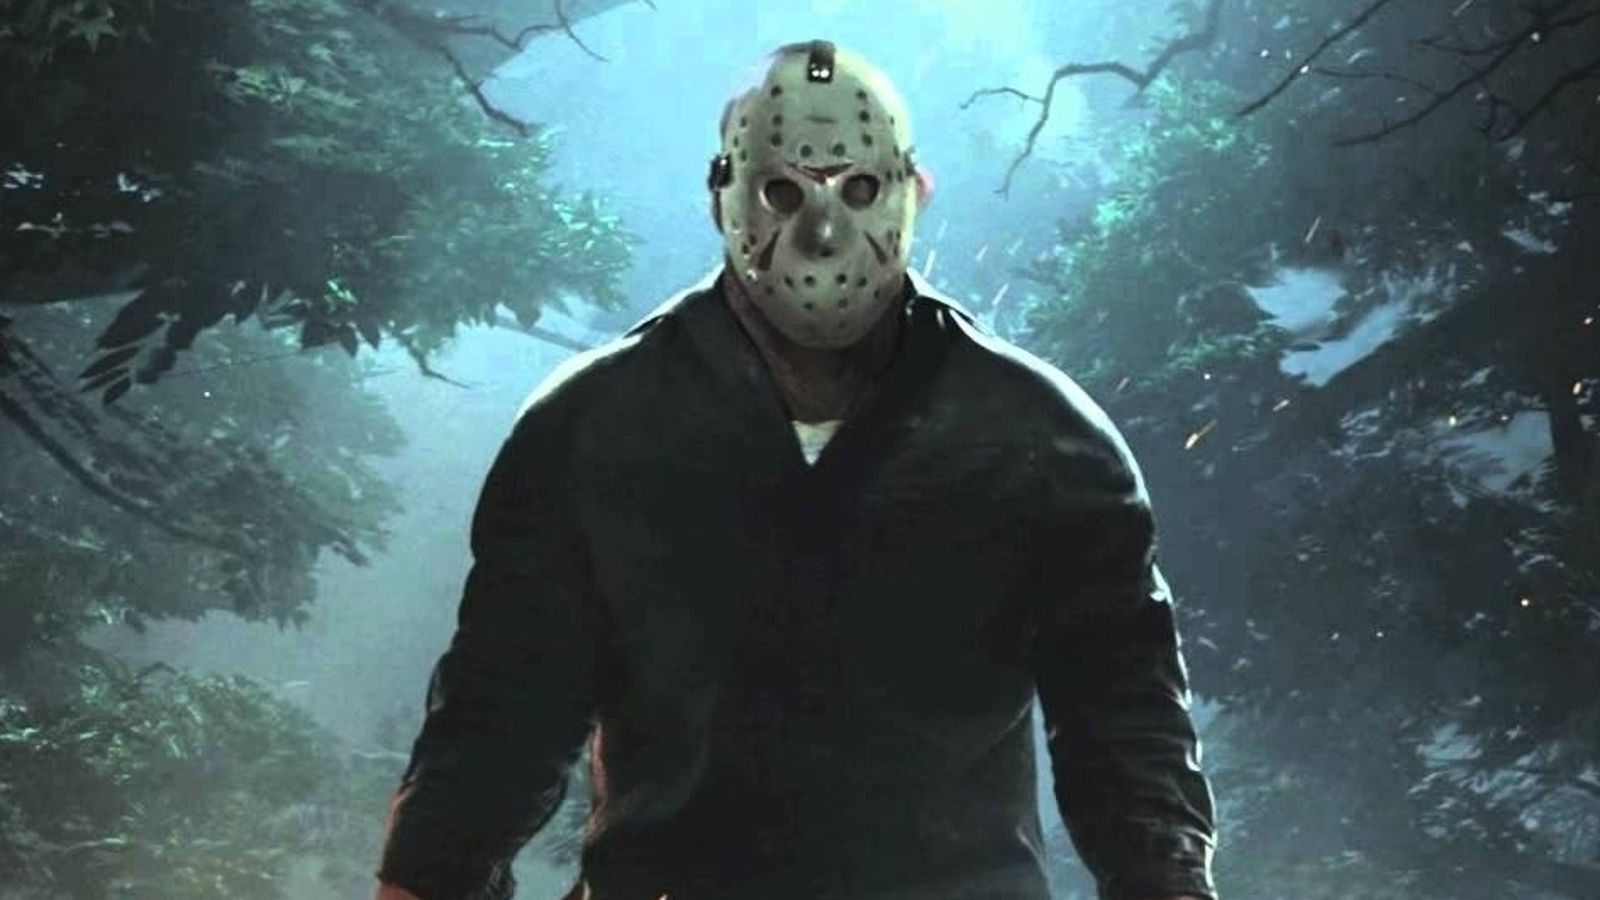 Friday The 13th: The Game Being Delisted And Shut Down - GameSpot